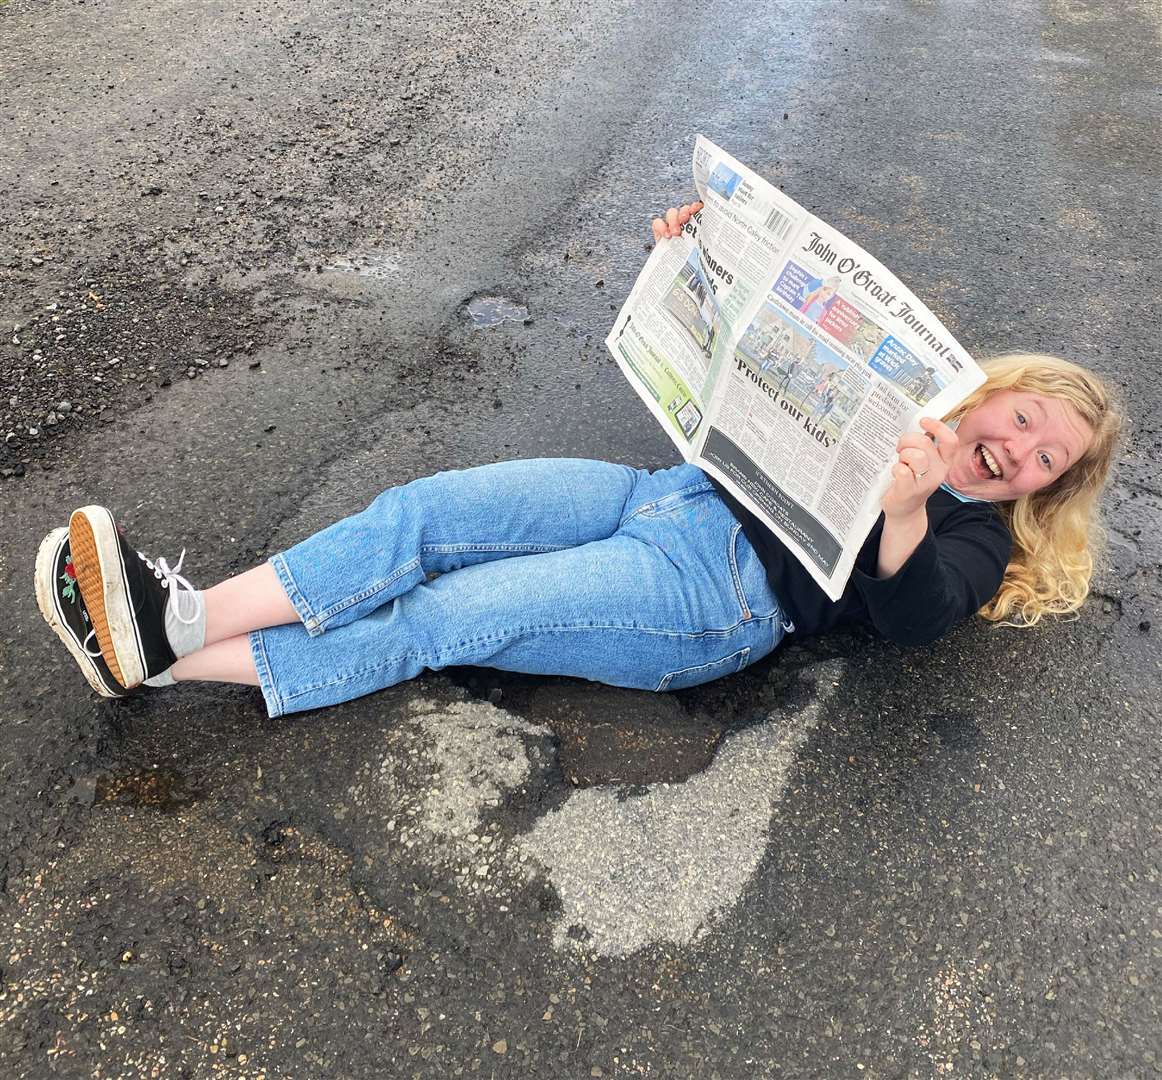 Enya Evans reading the Groat in a Lybster pothole. She could see the funny side, but was also keen to make a serious point about the state of the county's roads.